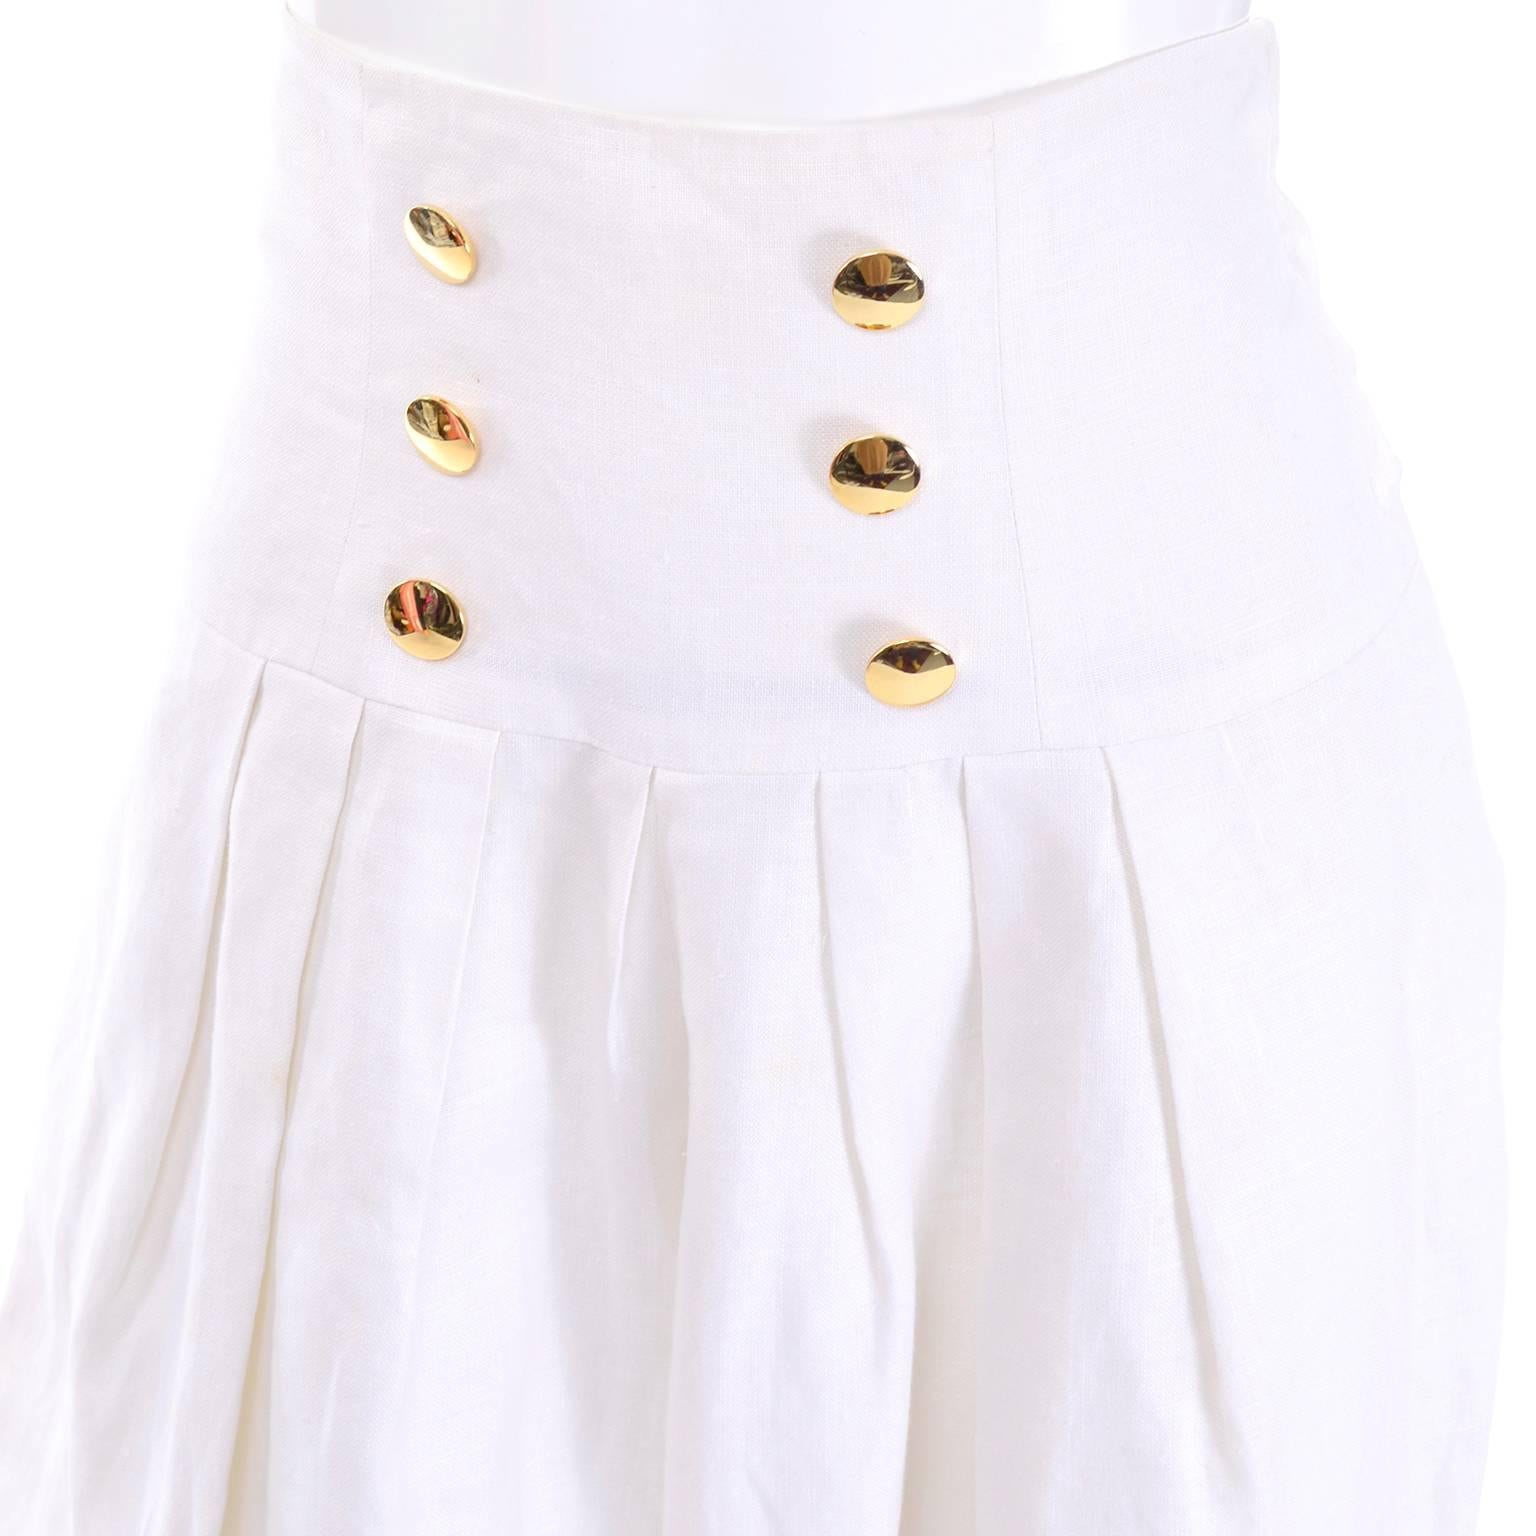 These high waisted vintage Nipon Boutique white sailor style pants are made in a beautiful off white linen. These wonderful pleated trousers have wide legs with pleats and three navy blue stripes at the cuff. There are six gold tone decorative